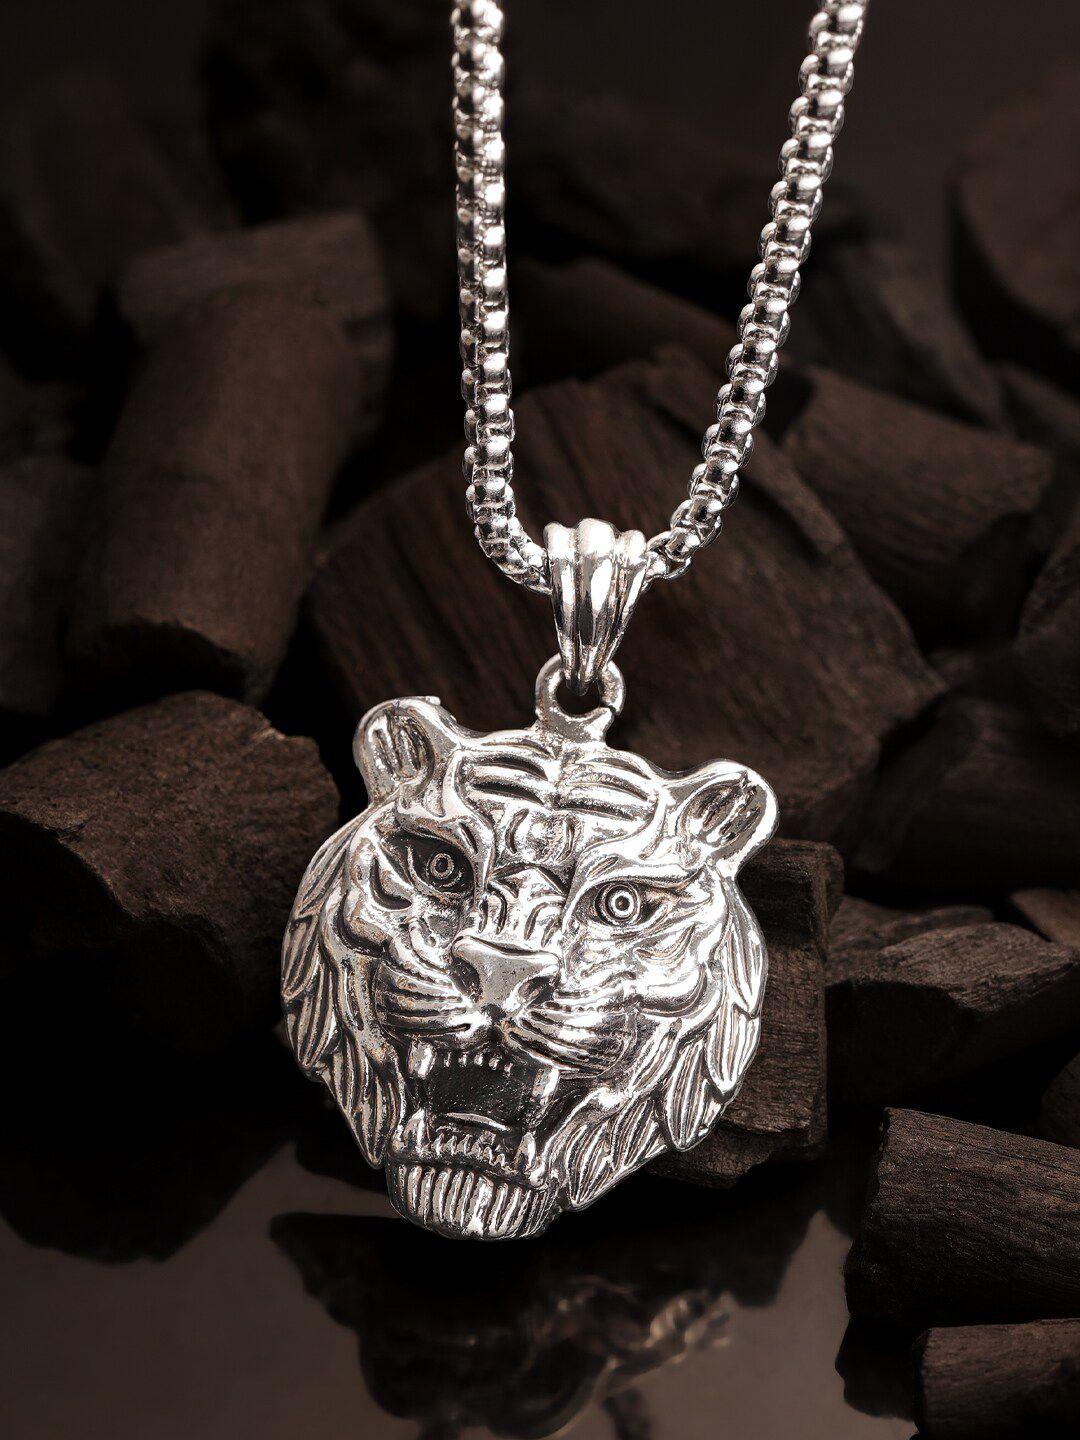 roadster animal shaped pendants with chains